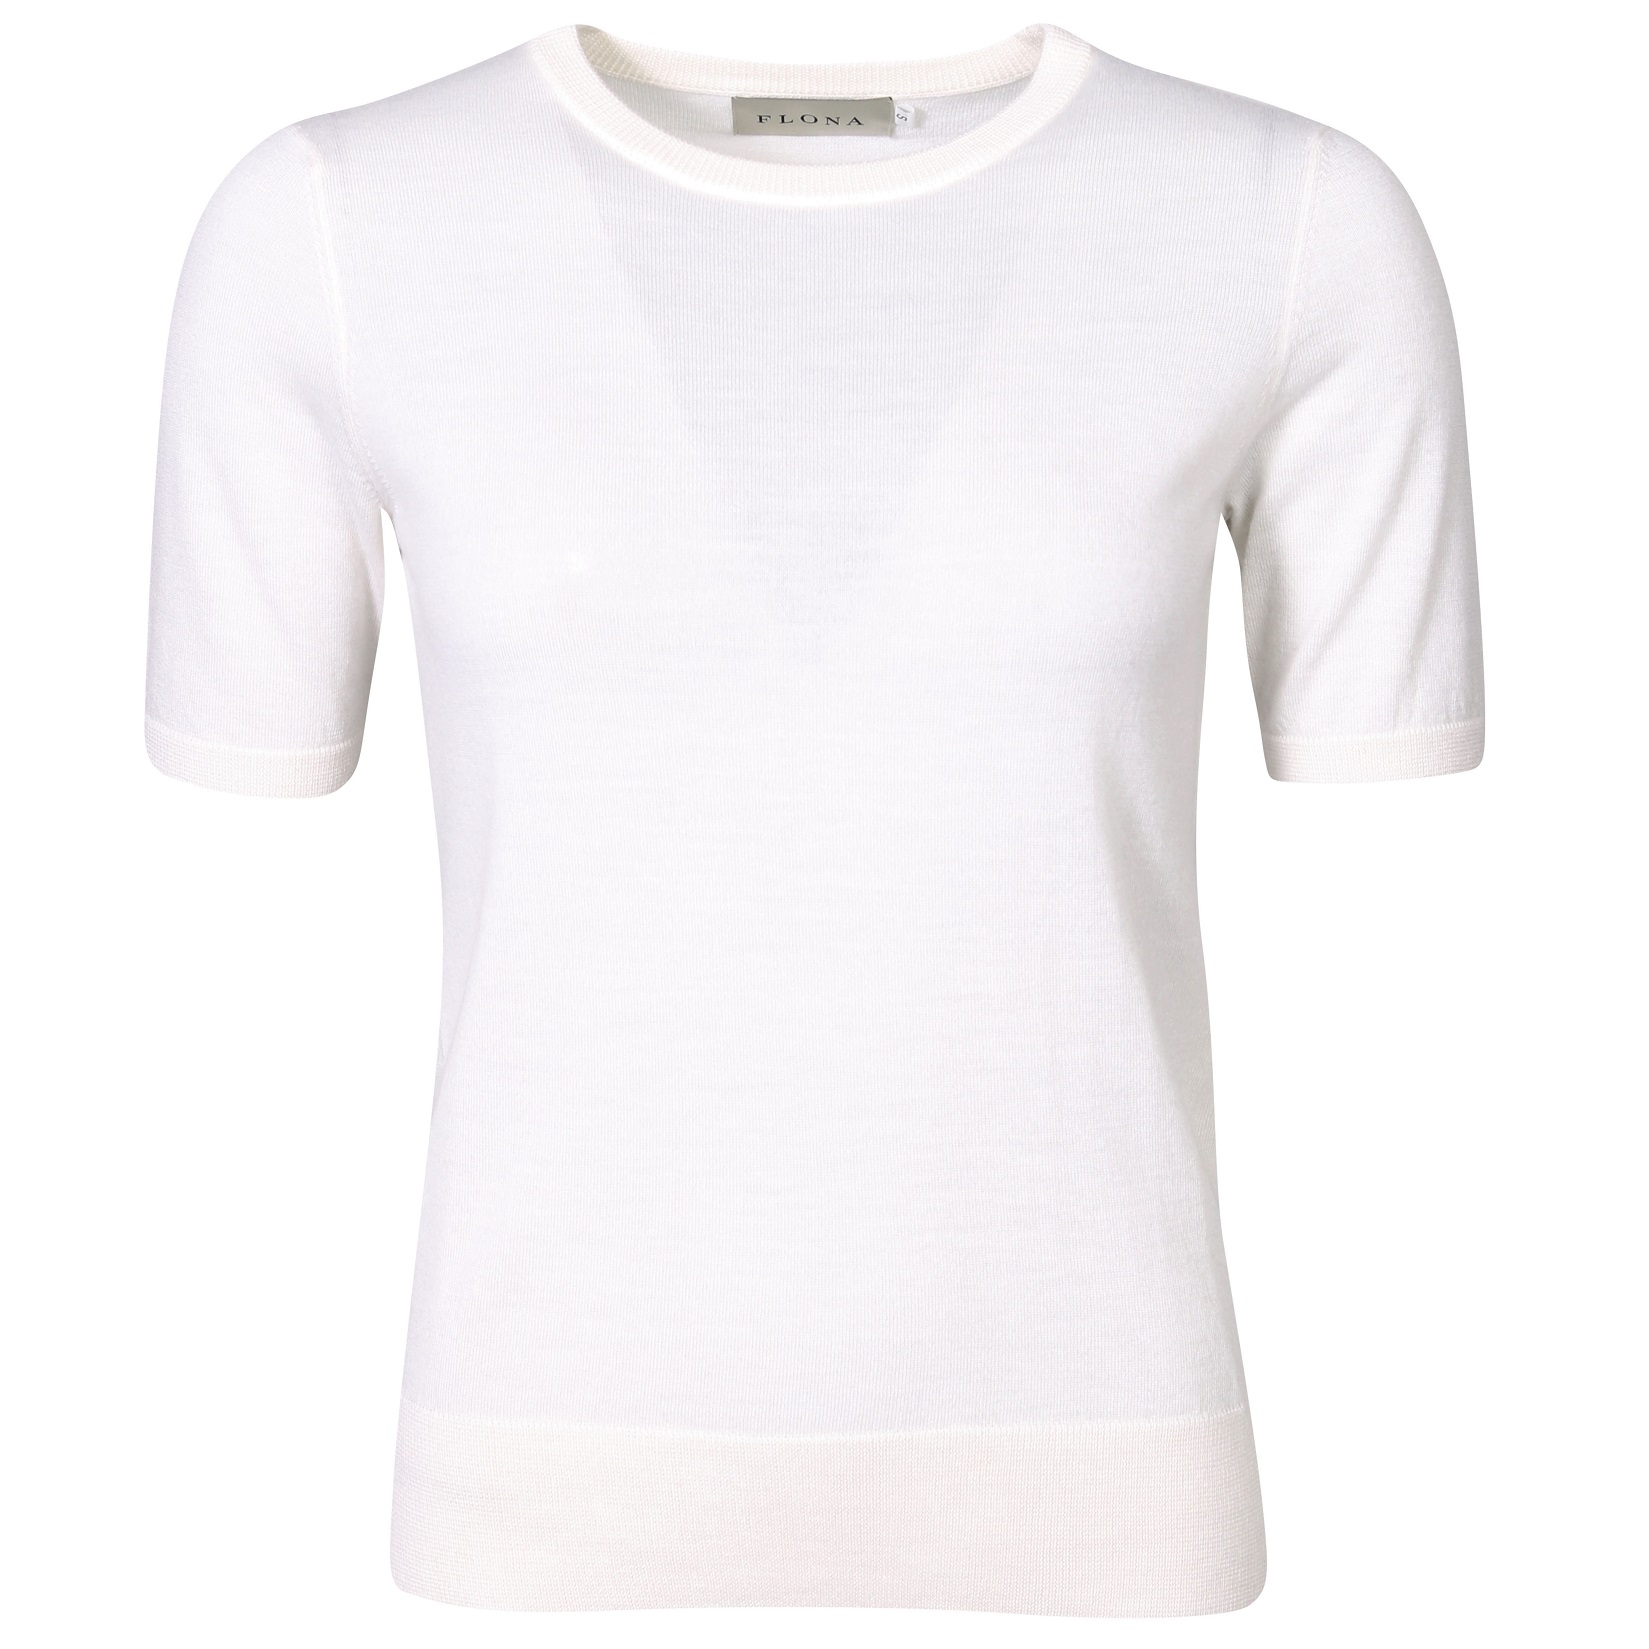 FLONA Cashmere T-Shirt in Off White L